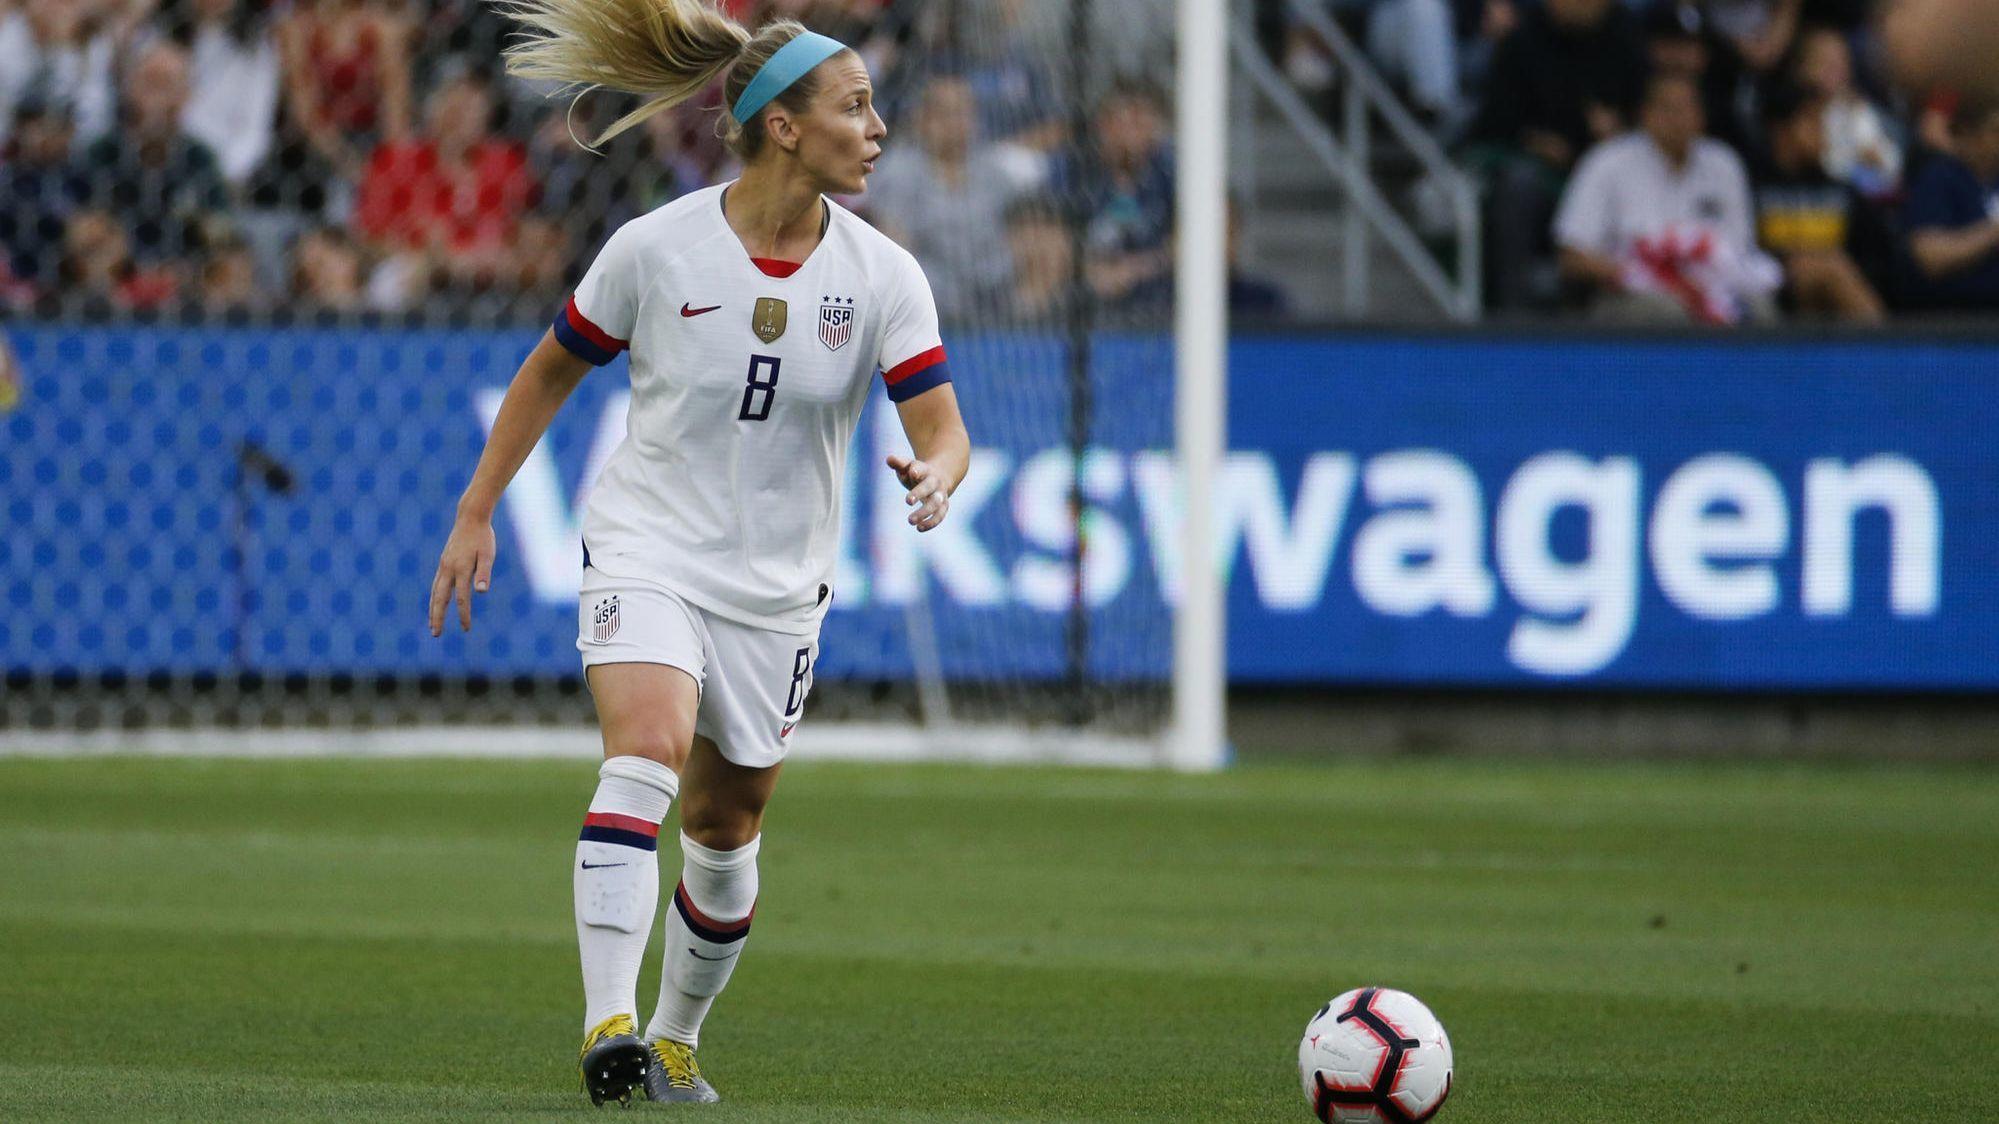 4 Red Stars named to U.S. roster for Women's World Cup